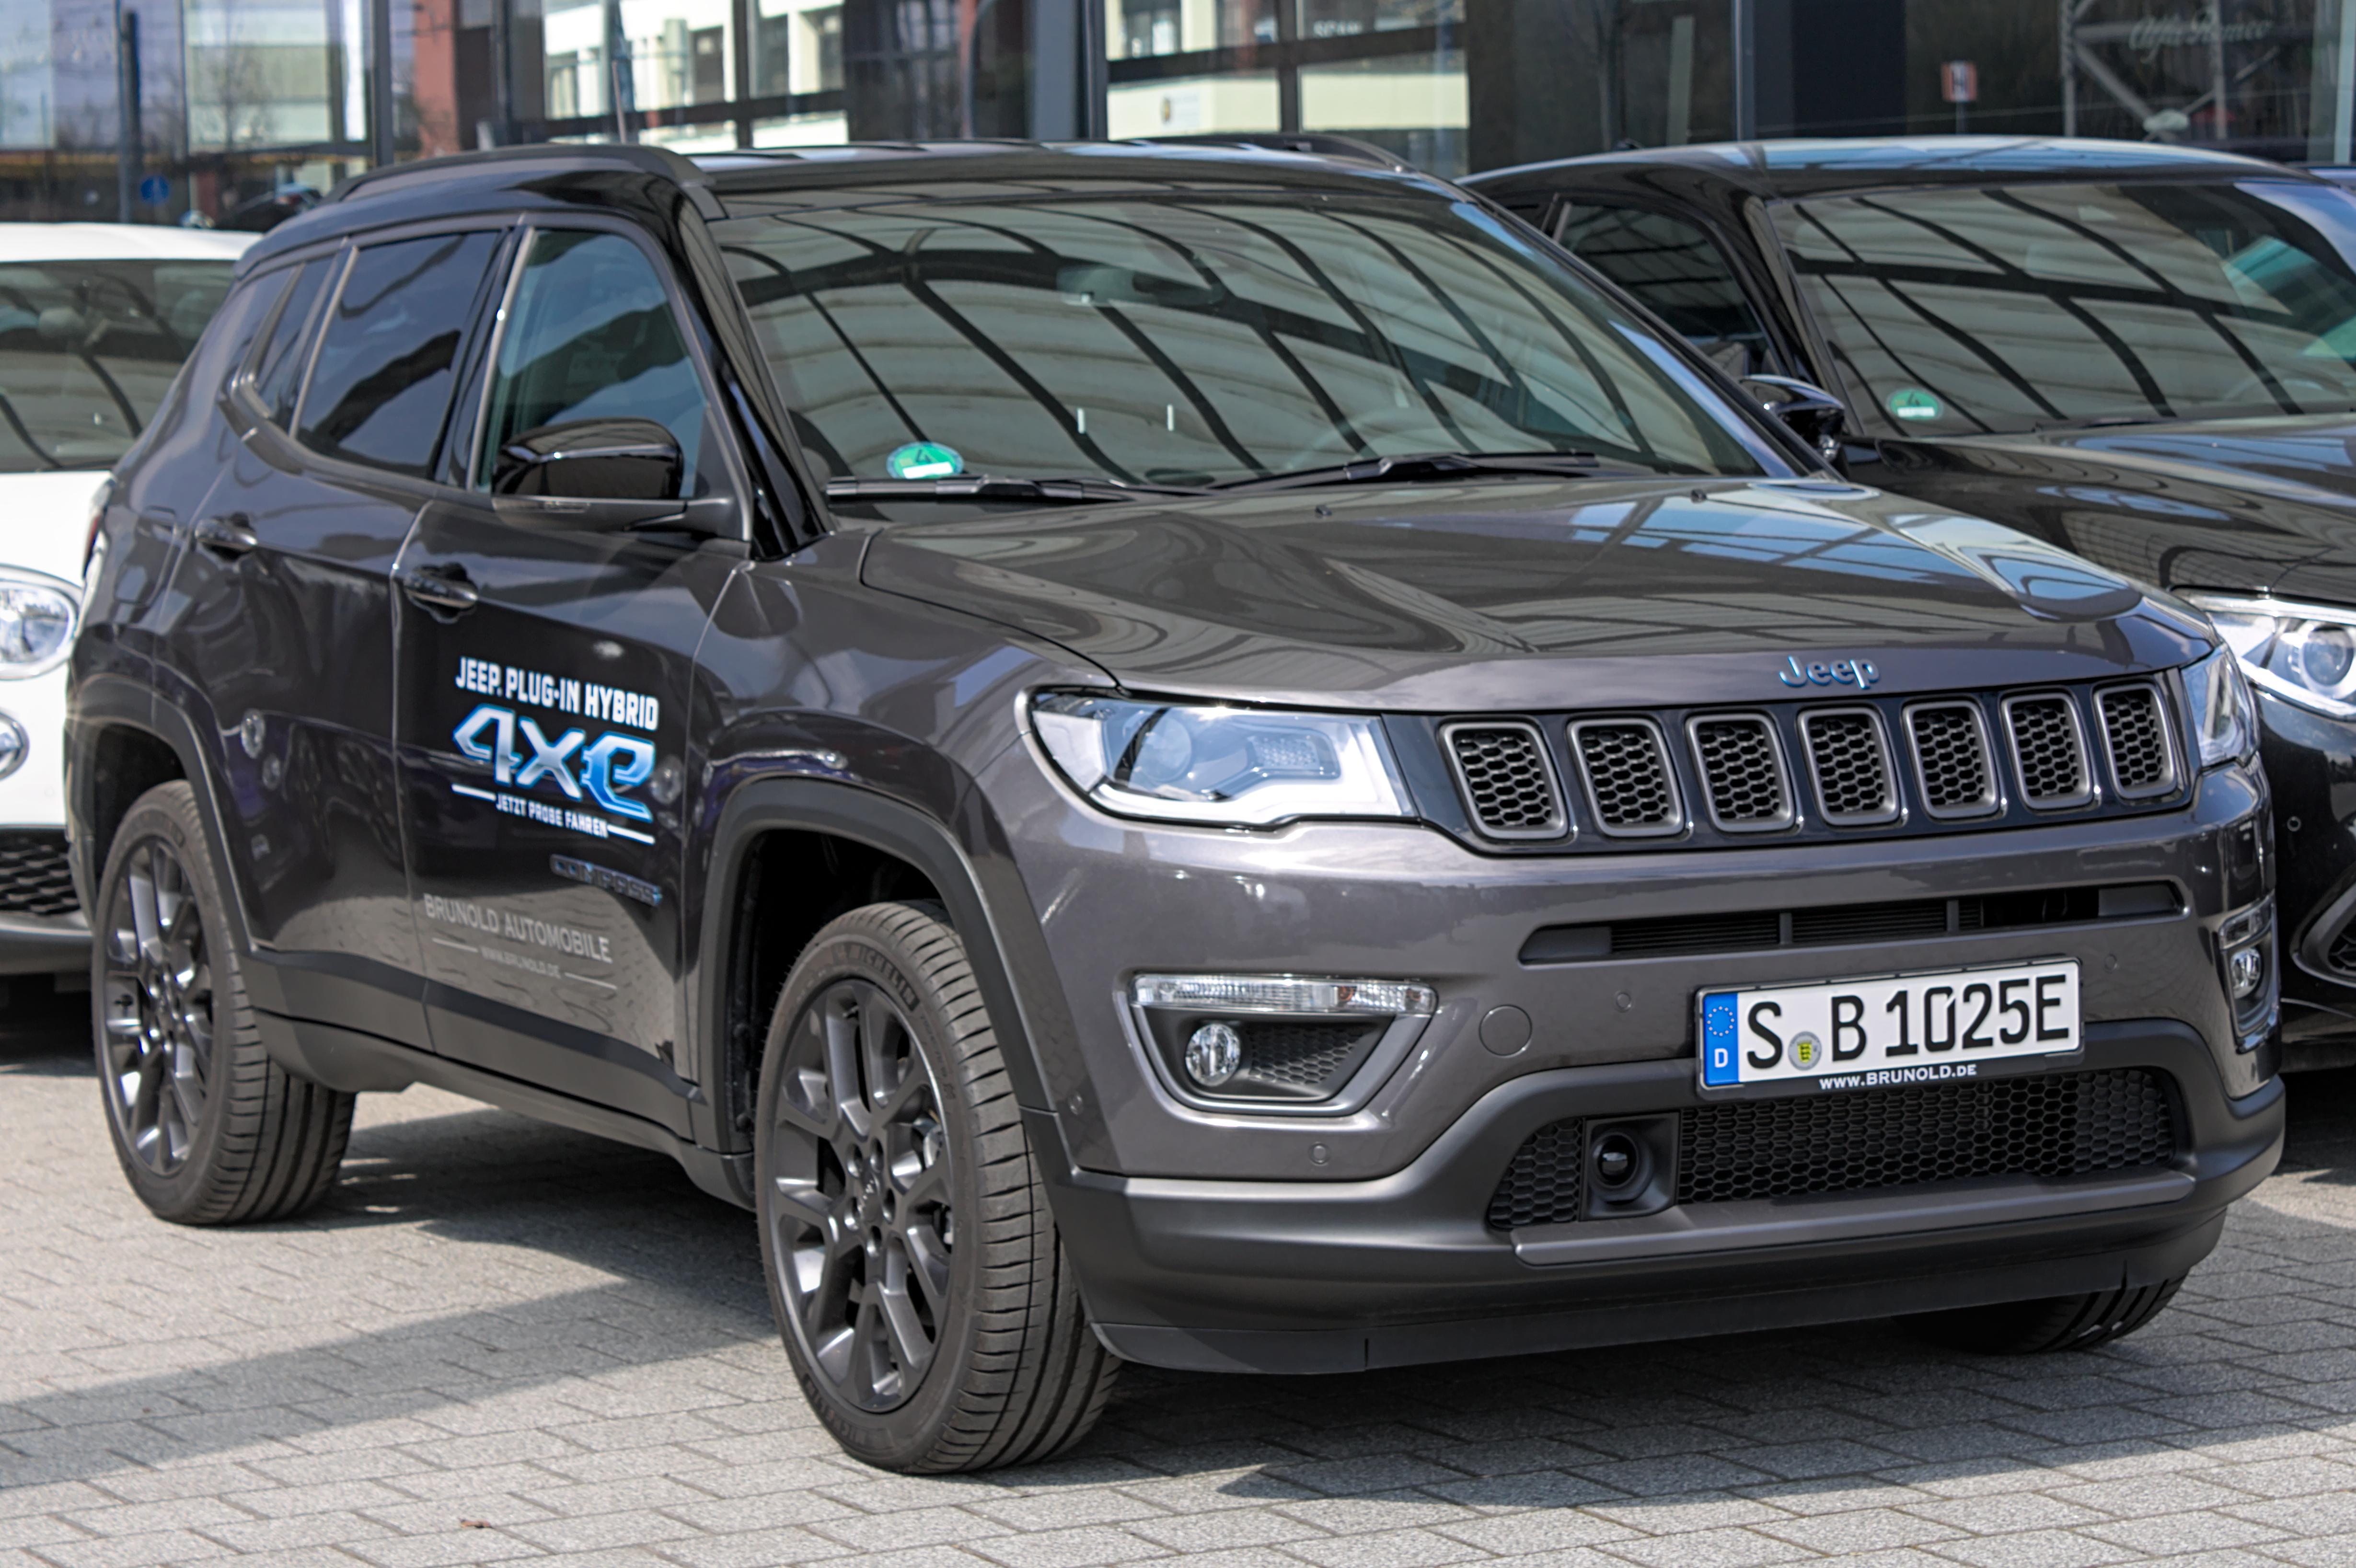 Comparison of Different Jeep Compass Models and Their Gas Tank Sizes